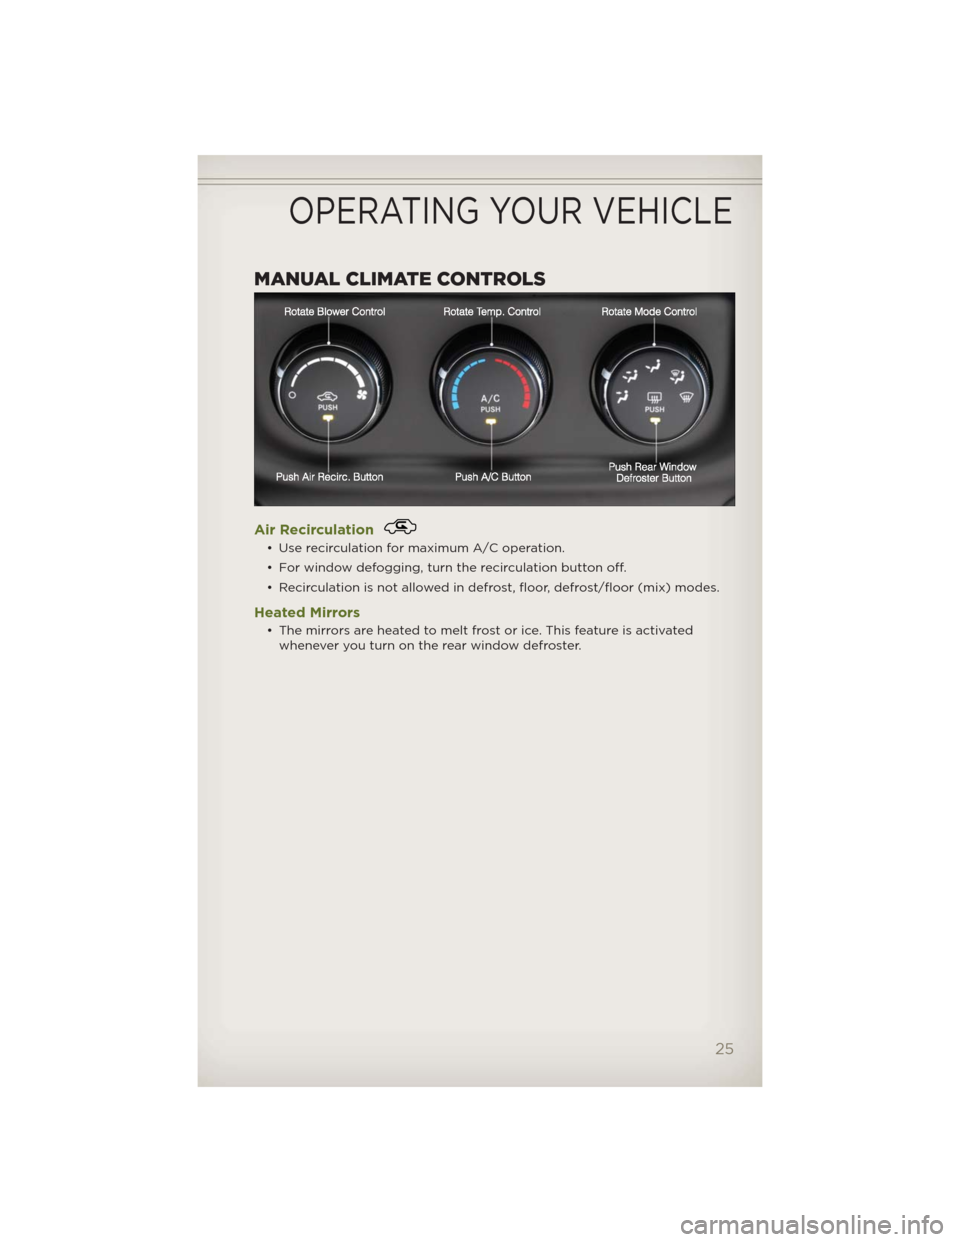 JEEP WRANGLER 2012 JK / 3.G User Guide MANUAL CLIMATE CONTROLS
Air Recirculation
• Use recirculation for maximum A/C operation.
• For window defogging, turn the recirculation button off.
• Recirculation is not allowed in defrost, flo